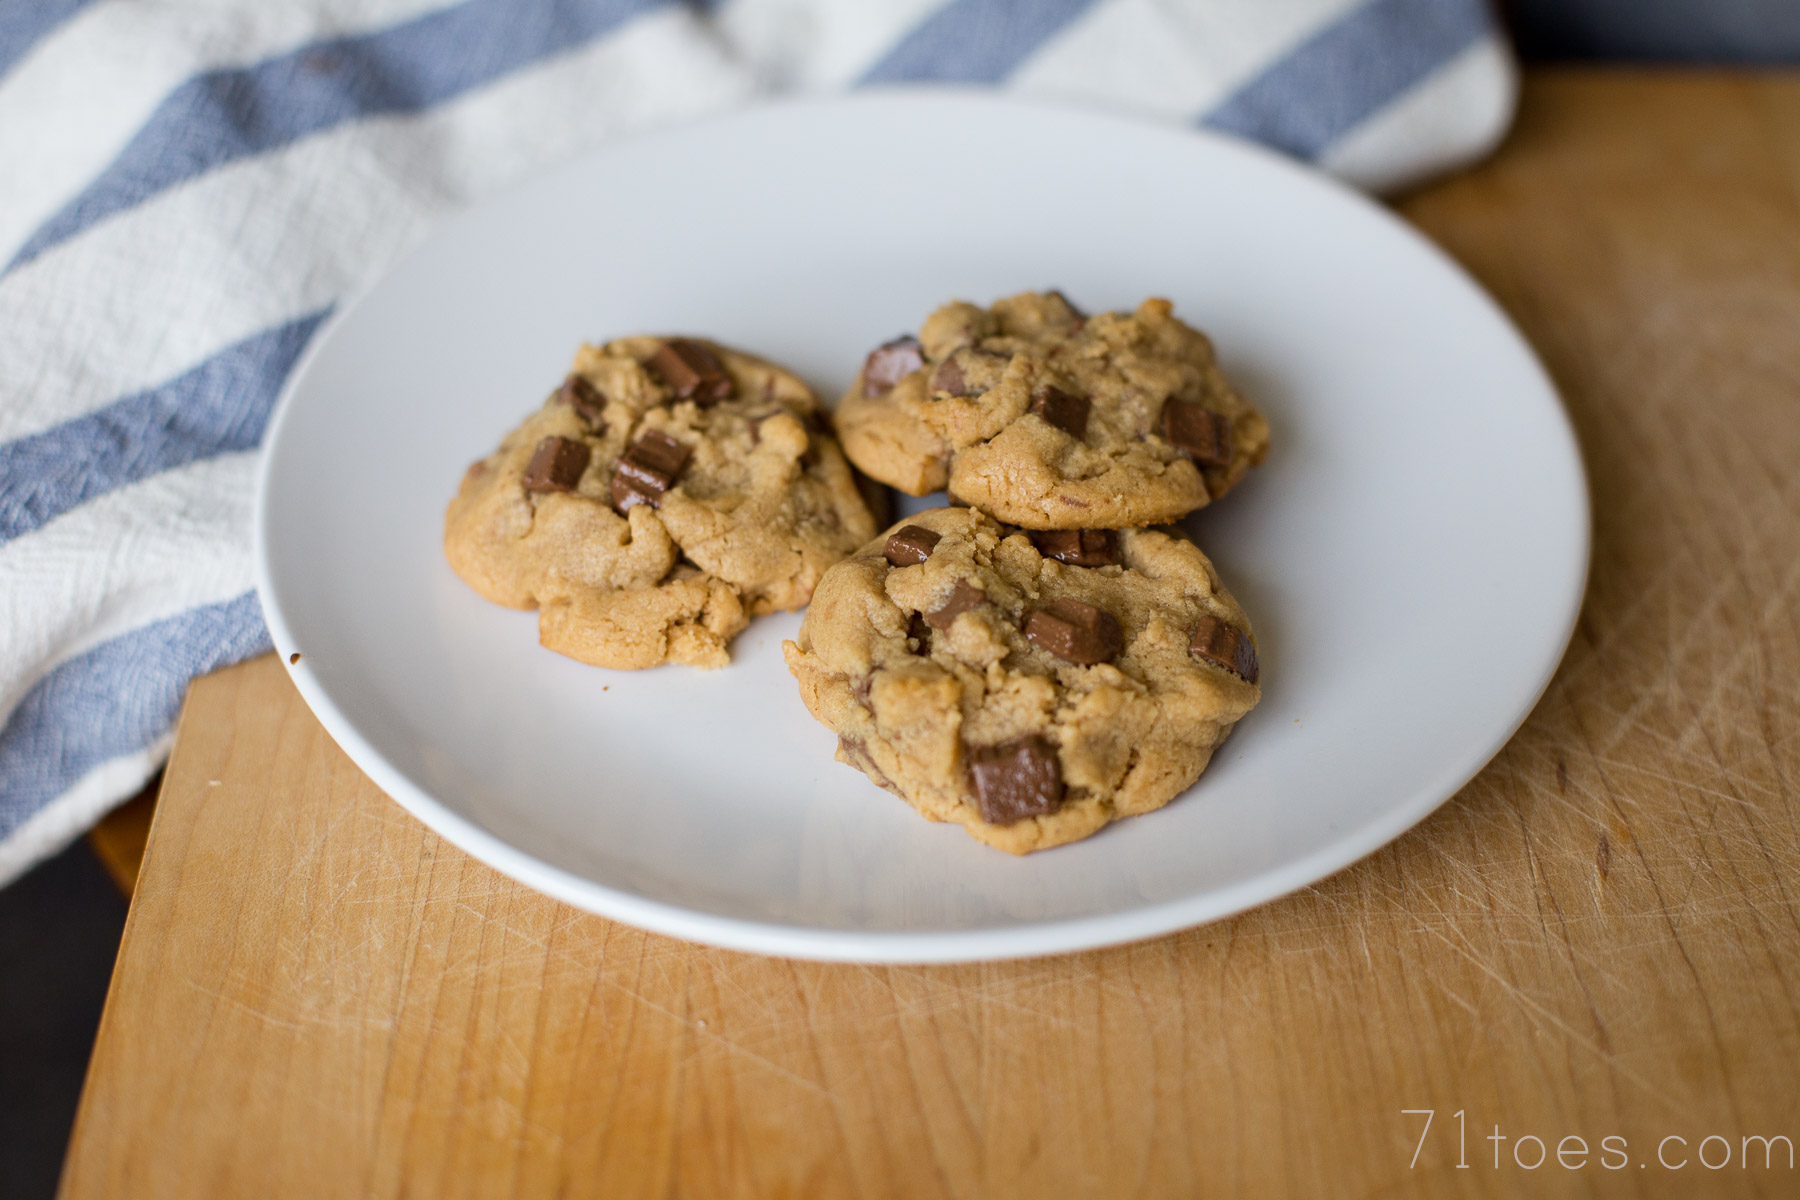 Julie’s peanut butter chocolate chip cookies